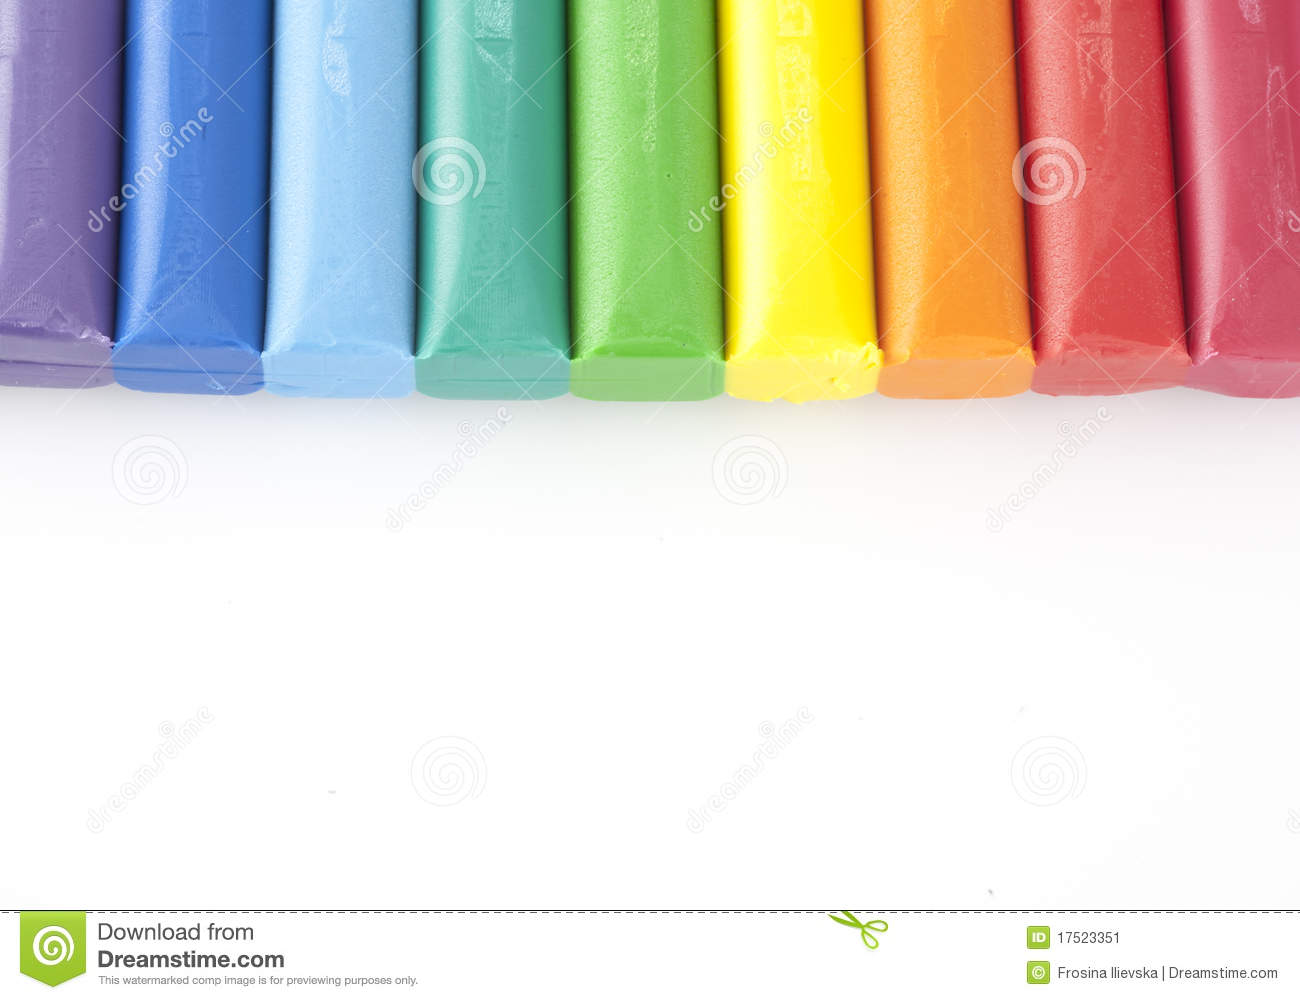 Colorful Modeling Clay Stock Image   Image  17523351